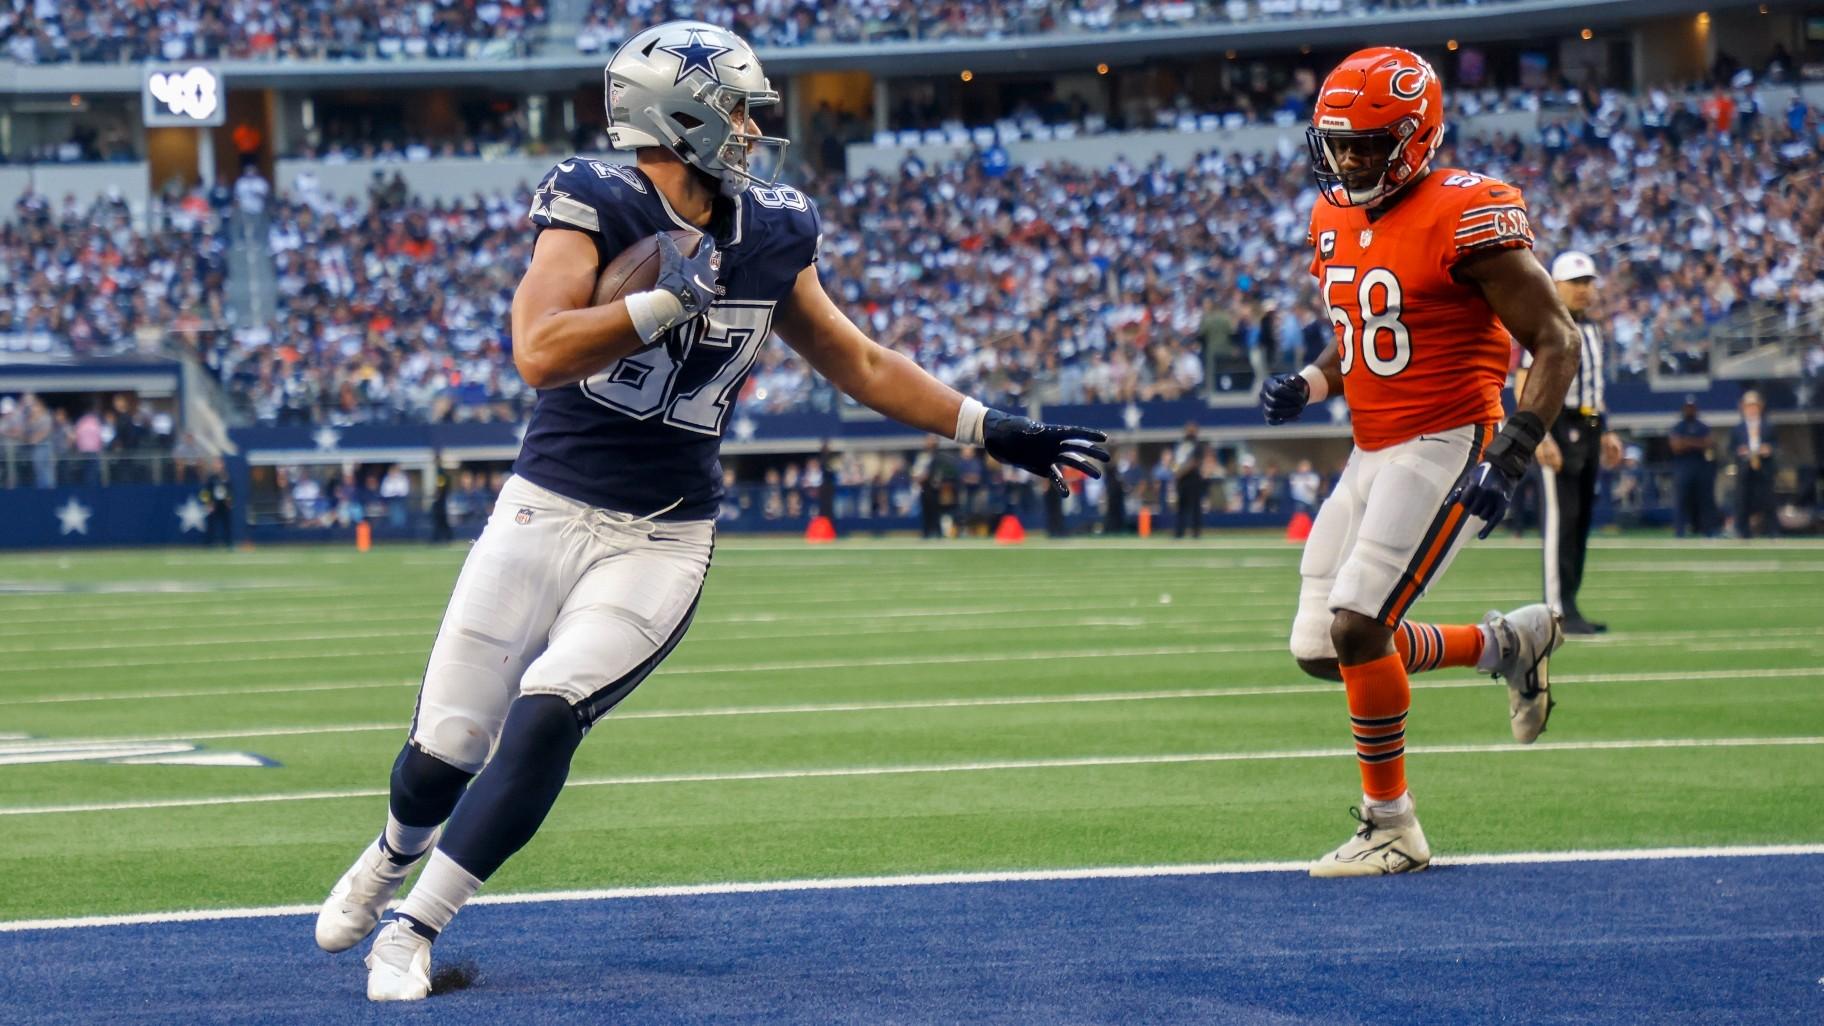 Dallas Cowboys’ Jake Ferguson catches a touchdown pass in front of Chicago Bears’ Roquan Smith during the first half of an NFL football game Sunday, Oct. 30, 2022, in Arlington, Texas. (AP Photo / Michael Ainsworth)